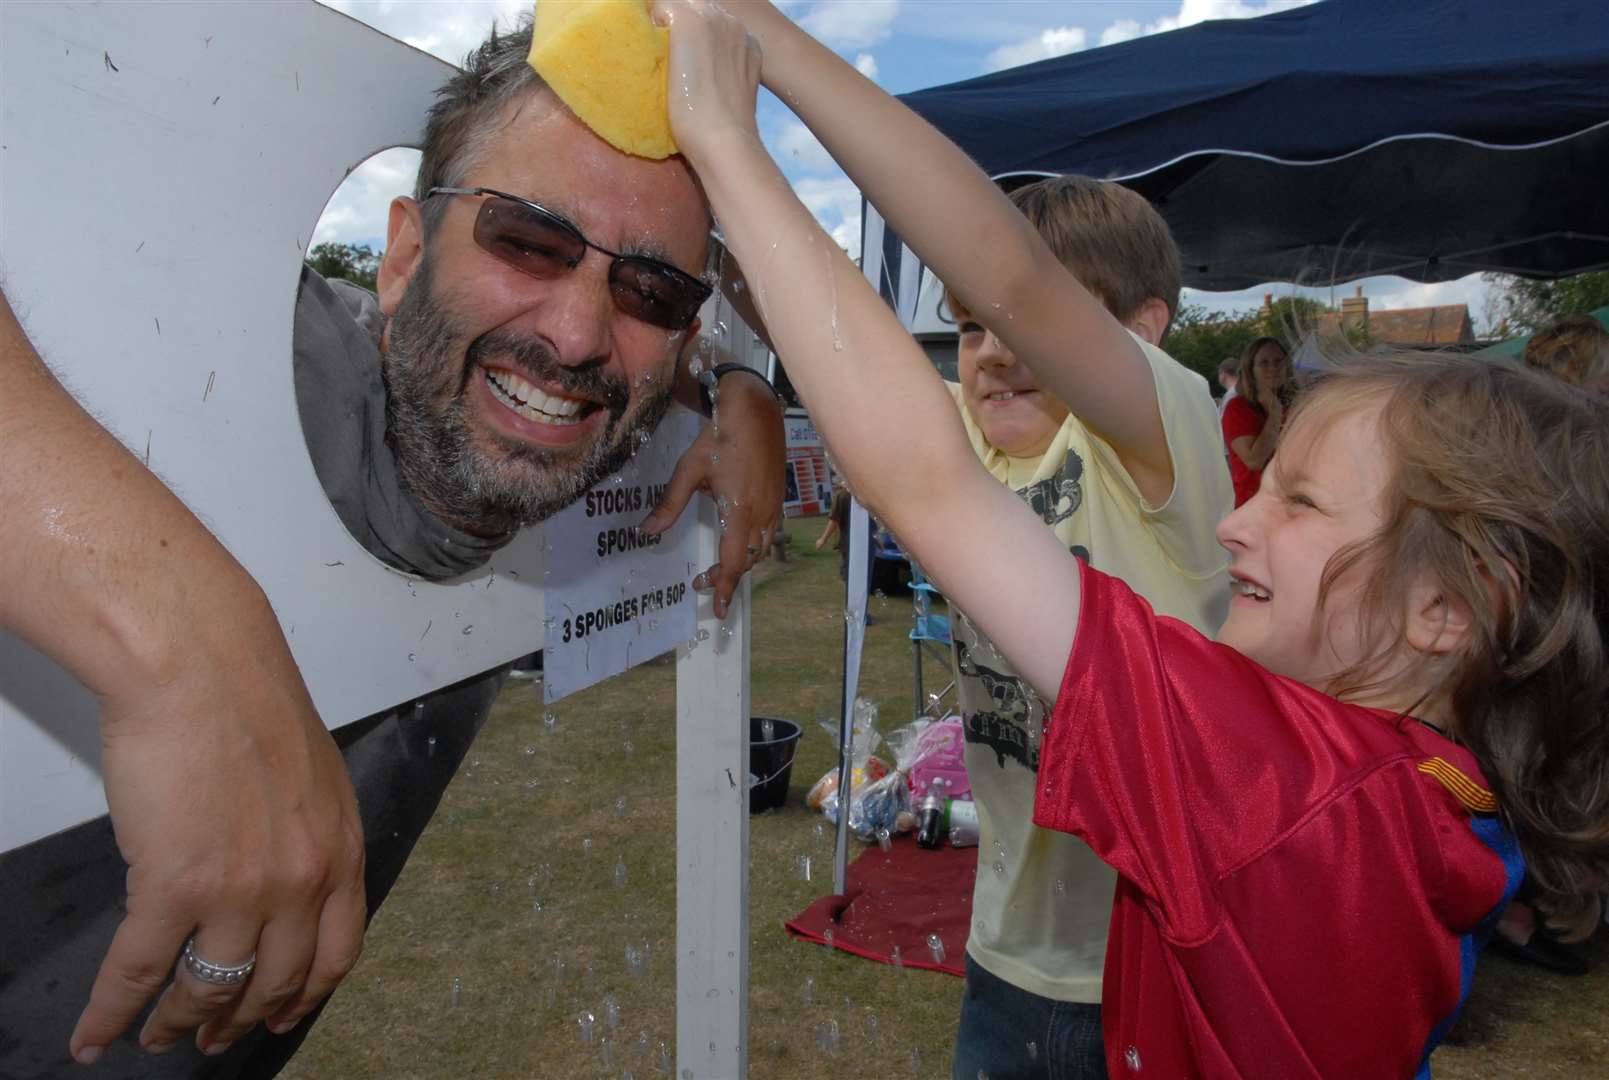 David Baddiel cools off in the stocks with a little help from Toby Woolston, 9, and Olivia Barletta, 8, at Rodmersham Primary School's fete. Picture: Mike Smith